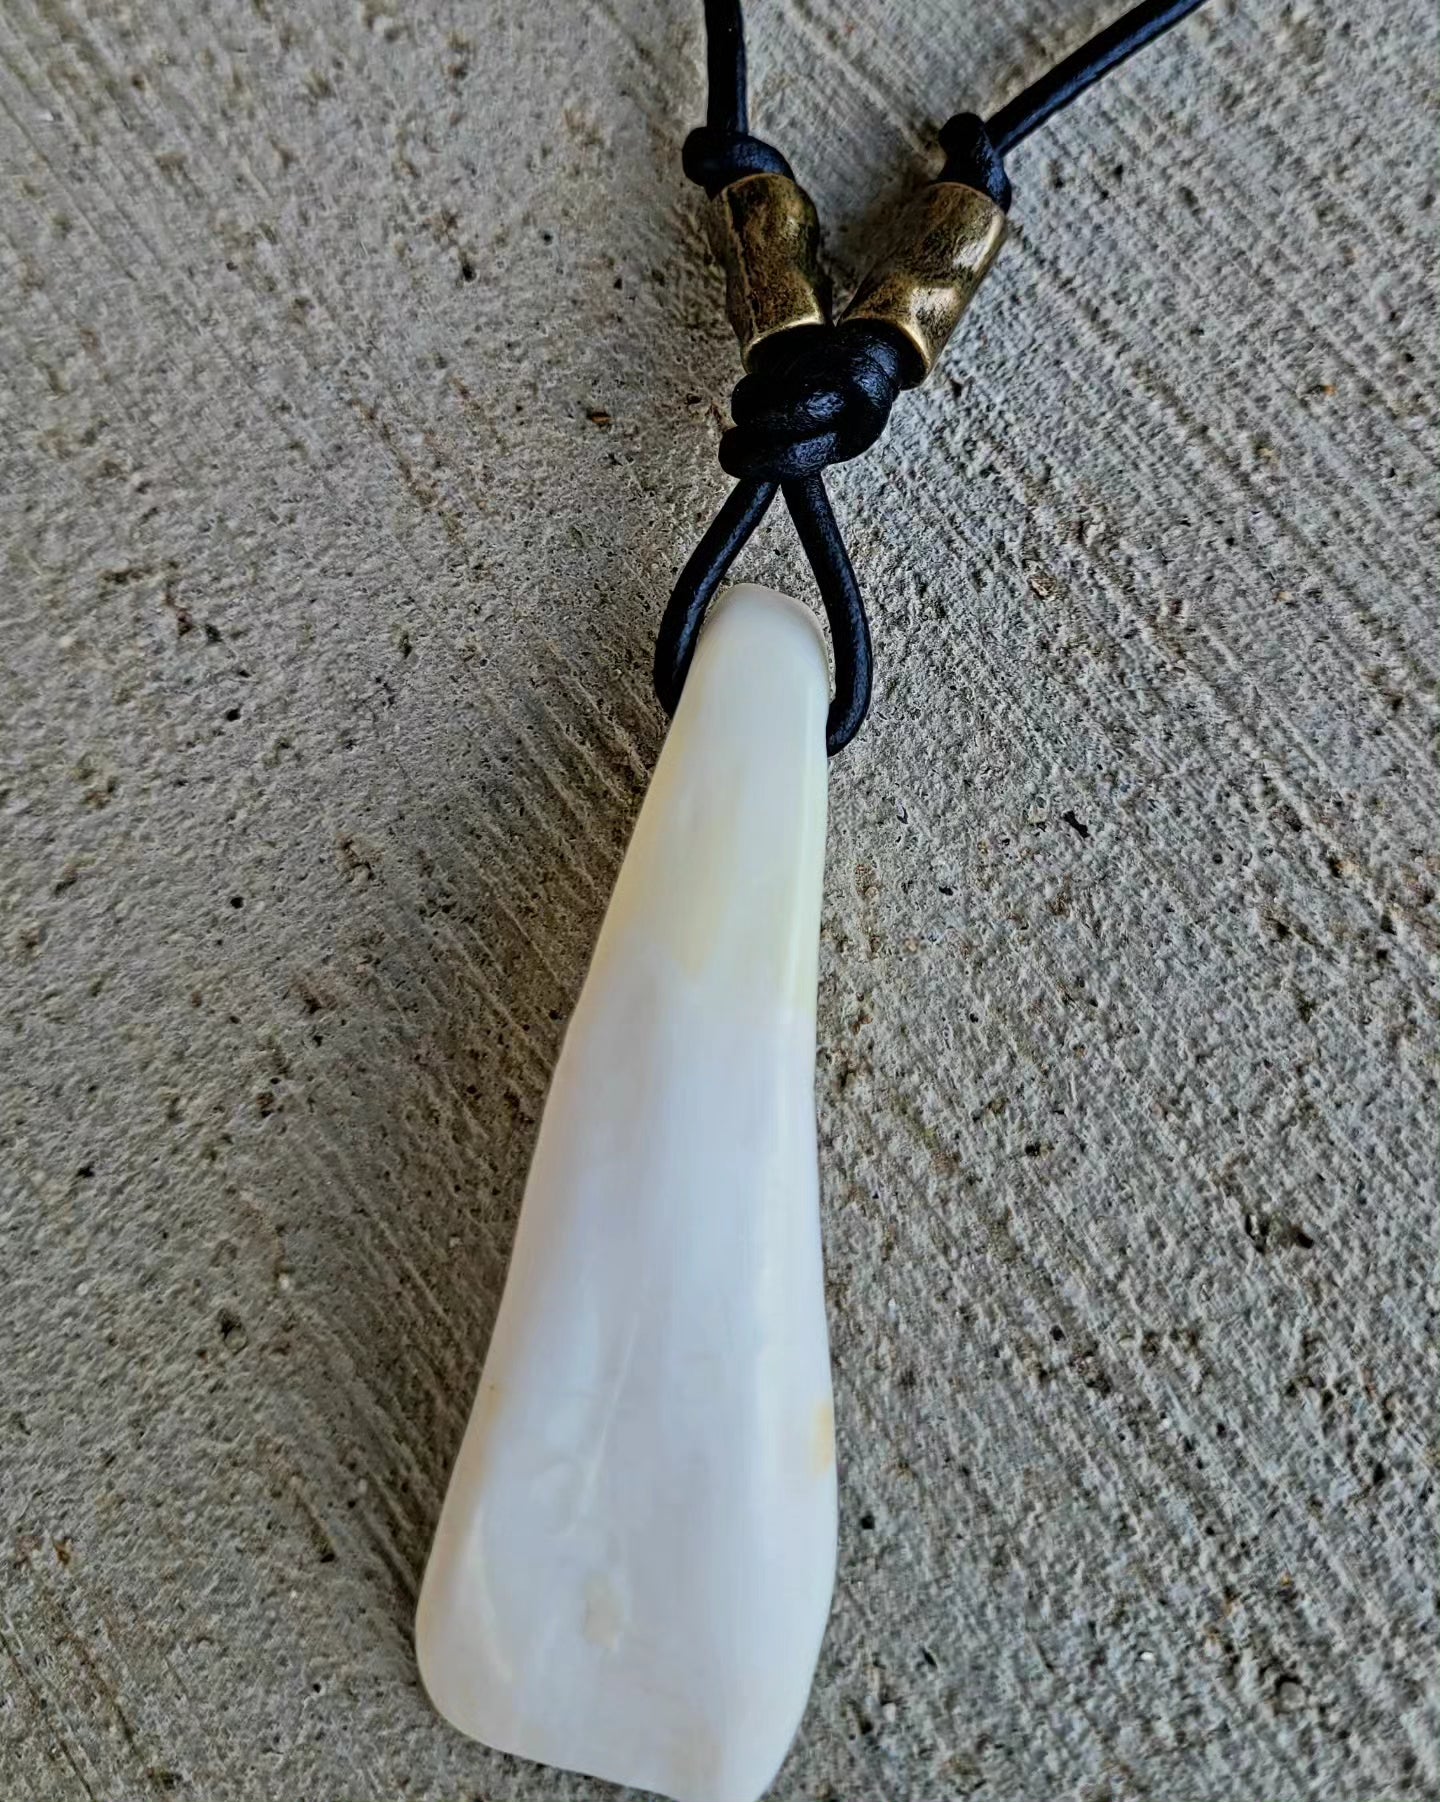 Buffalo Tooth Necklace